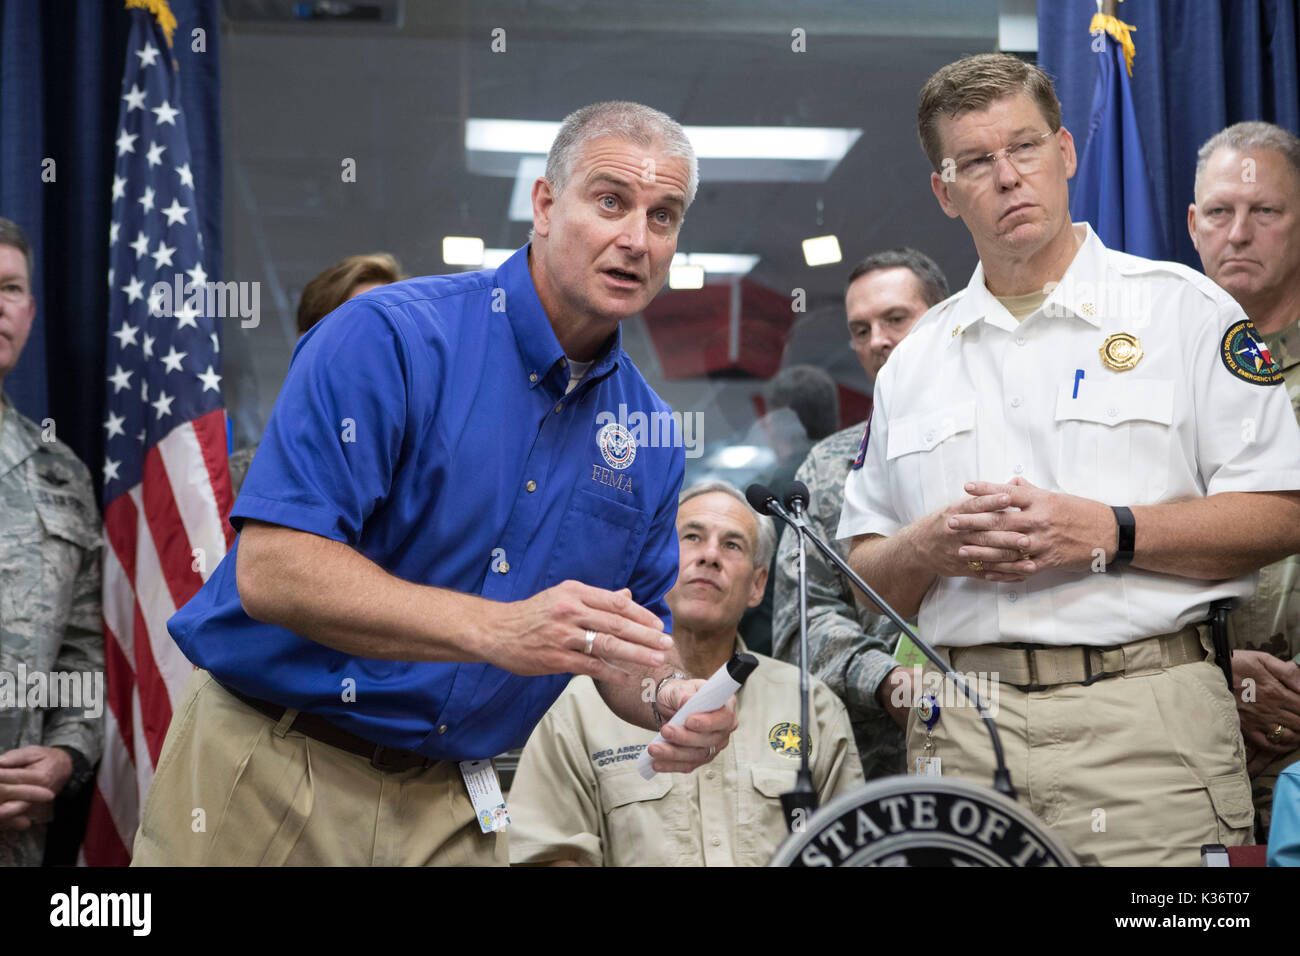 Austin, Texas USA Sept. 1, 2017: FEMA Region 6 Administrator Tony Robinson, l, speaks as Texas Gov. Greg Abbott and emergency officials continue response to extensive Hurricane Harvey damage at the Dept. of Public Safety Emergency Operations Center (EOC). Nim Kidd, chief of the Texas Division of Emergency Management, is on the right. Harvey will eventually cost the state tens of billions of dollars to recover. Credit: Bob Daemmrich/Alamy Live News Stock Photo